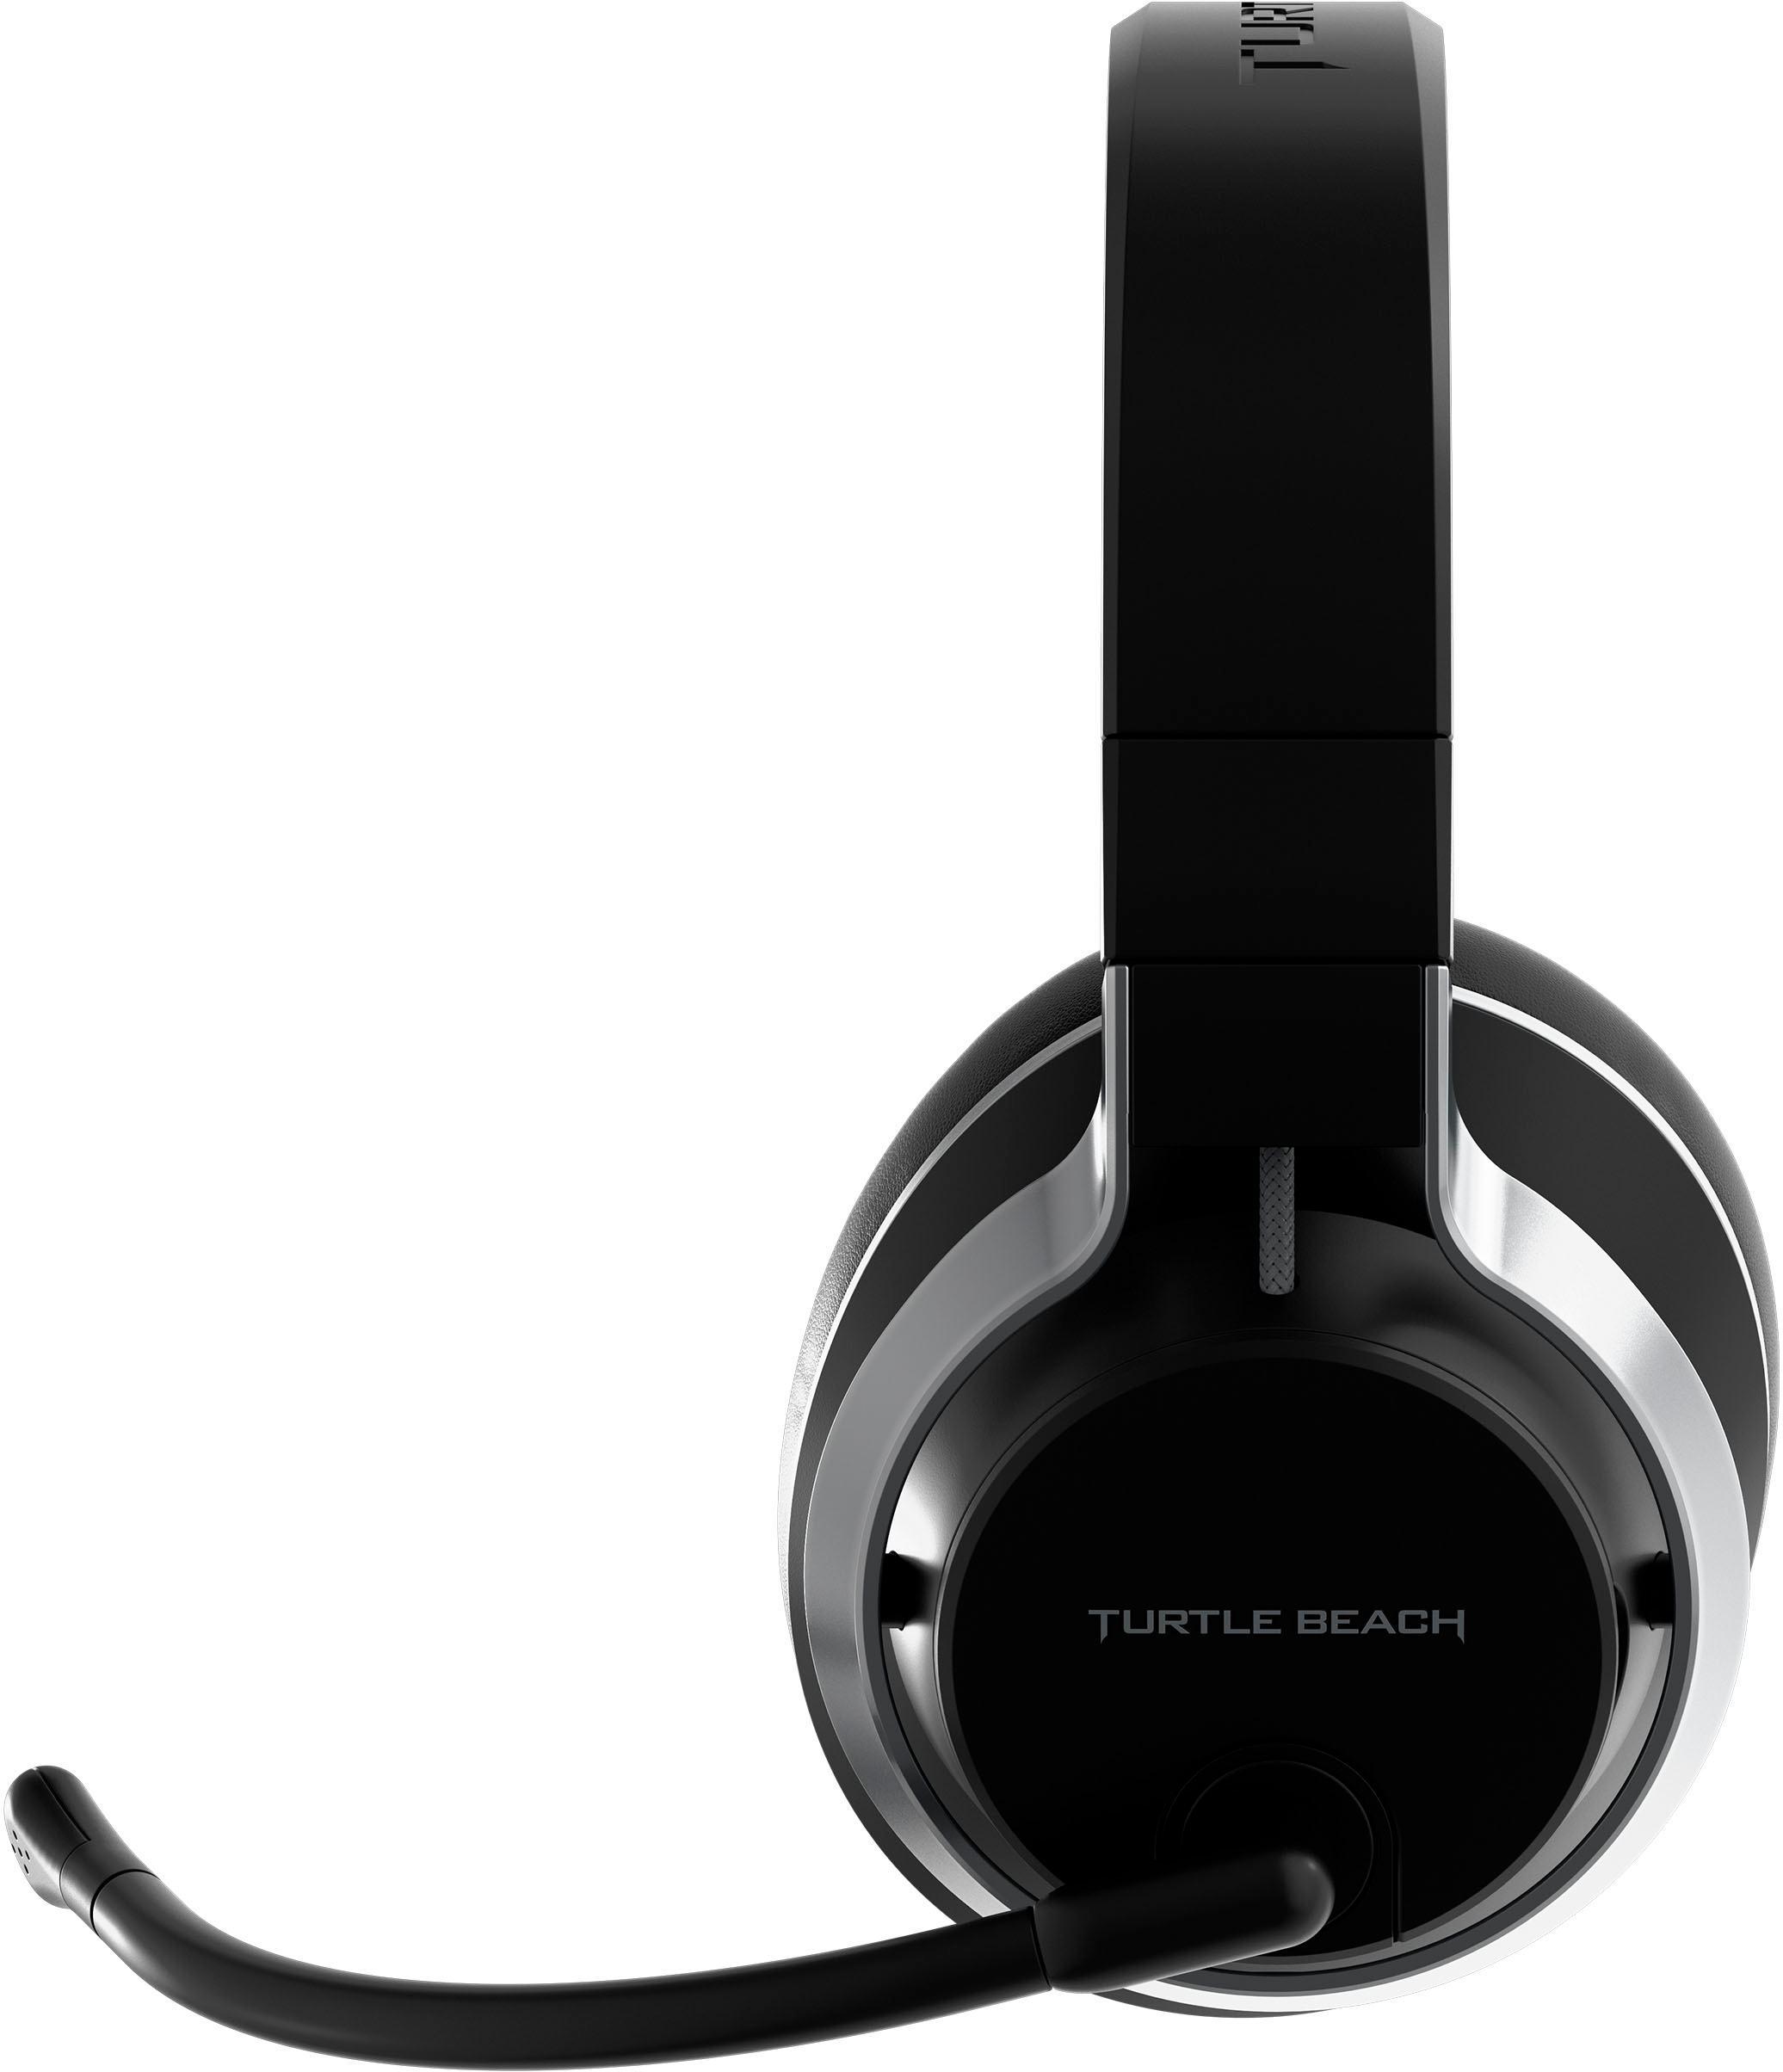 Turtle Beach Stealth Dual Wireless Pro and PS5, TBS-2360-01 PS4, Edition Xbox, Black PC - Noise-Cancelling Headset Best Buy Xbox for Batteries Switch, Gaming